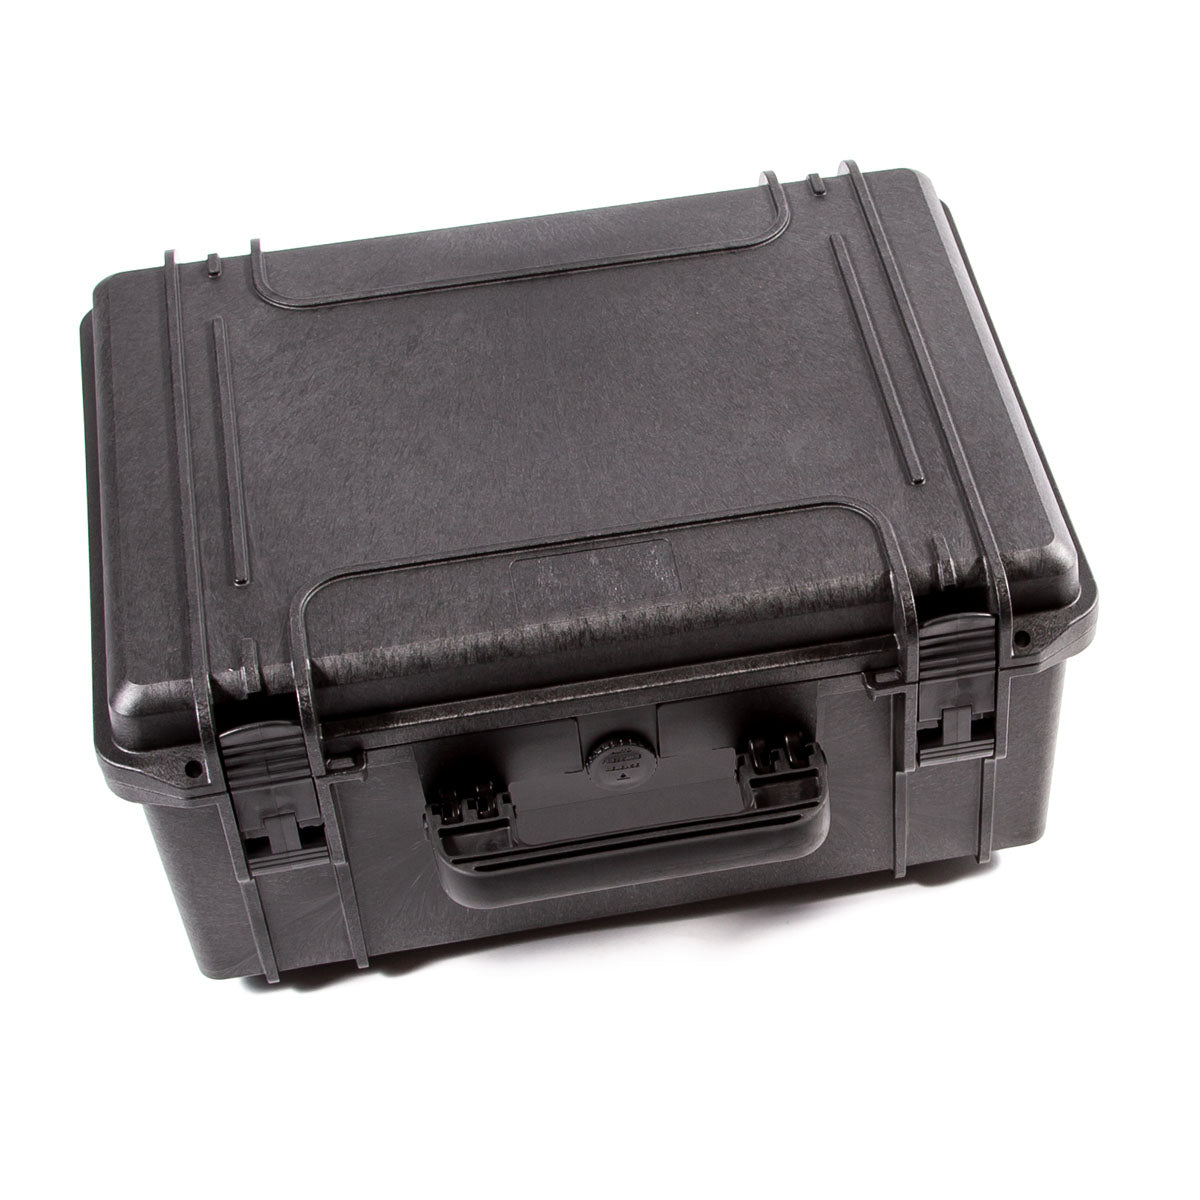 DS-Performance Case - carrying case for Jeti handheld transmitters from Hacker similar to Peli Case 80001860